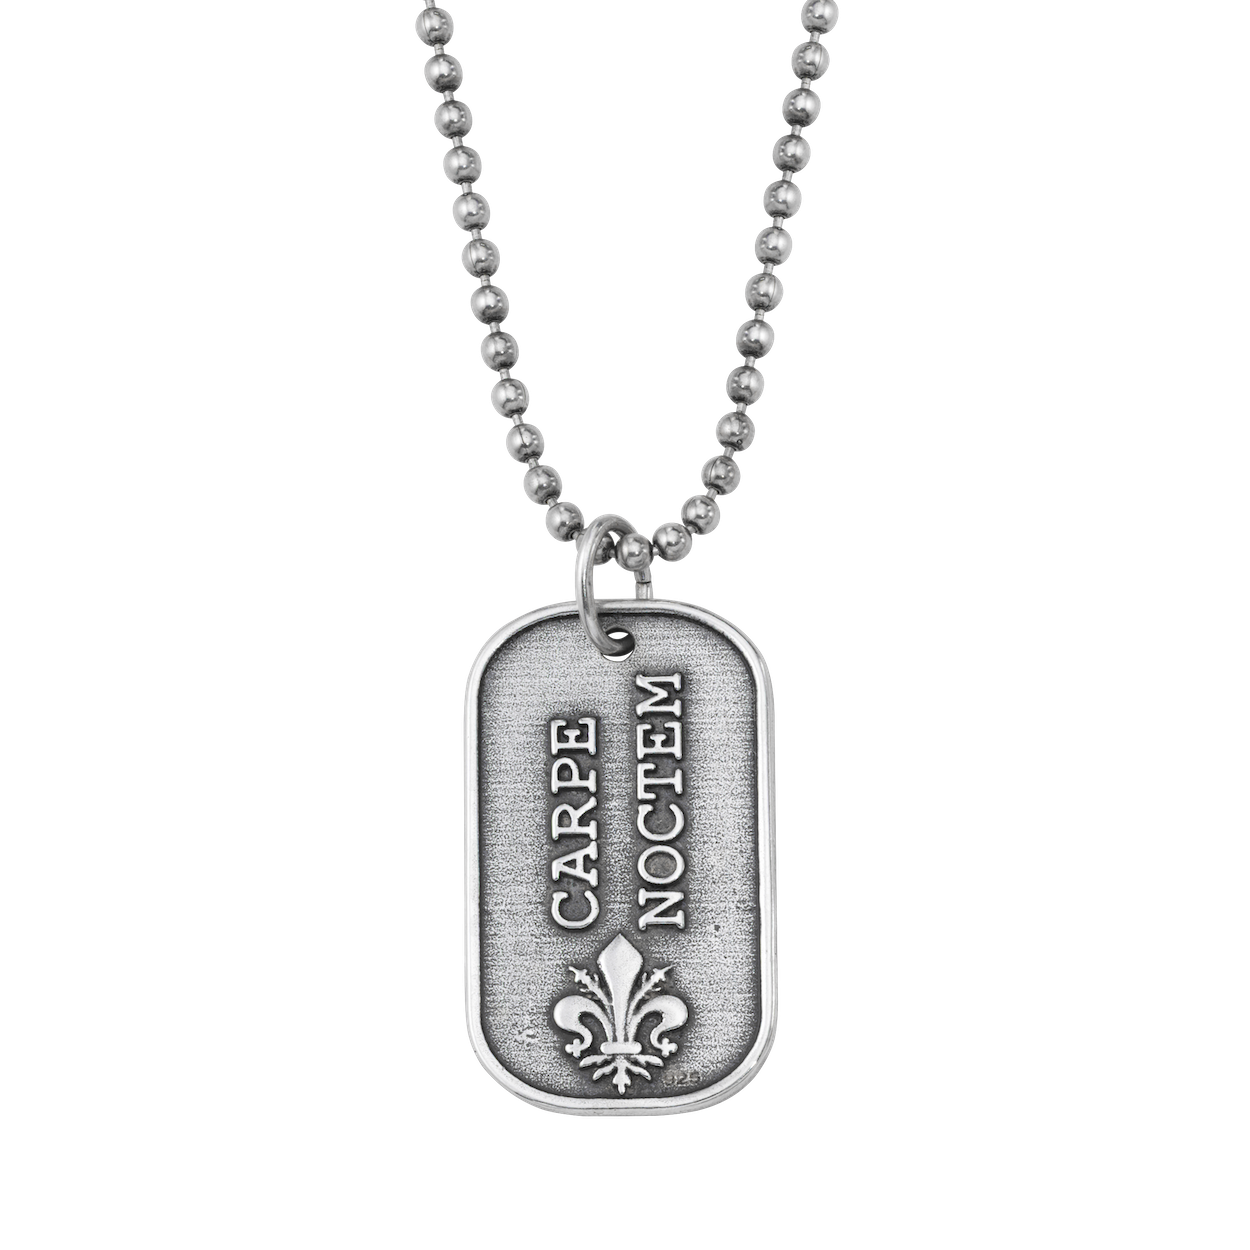 Dog Tag Necklaces | Engraved Dog Tags for Men and Women - Sandy Steven  Engravers